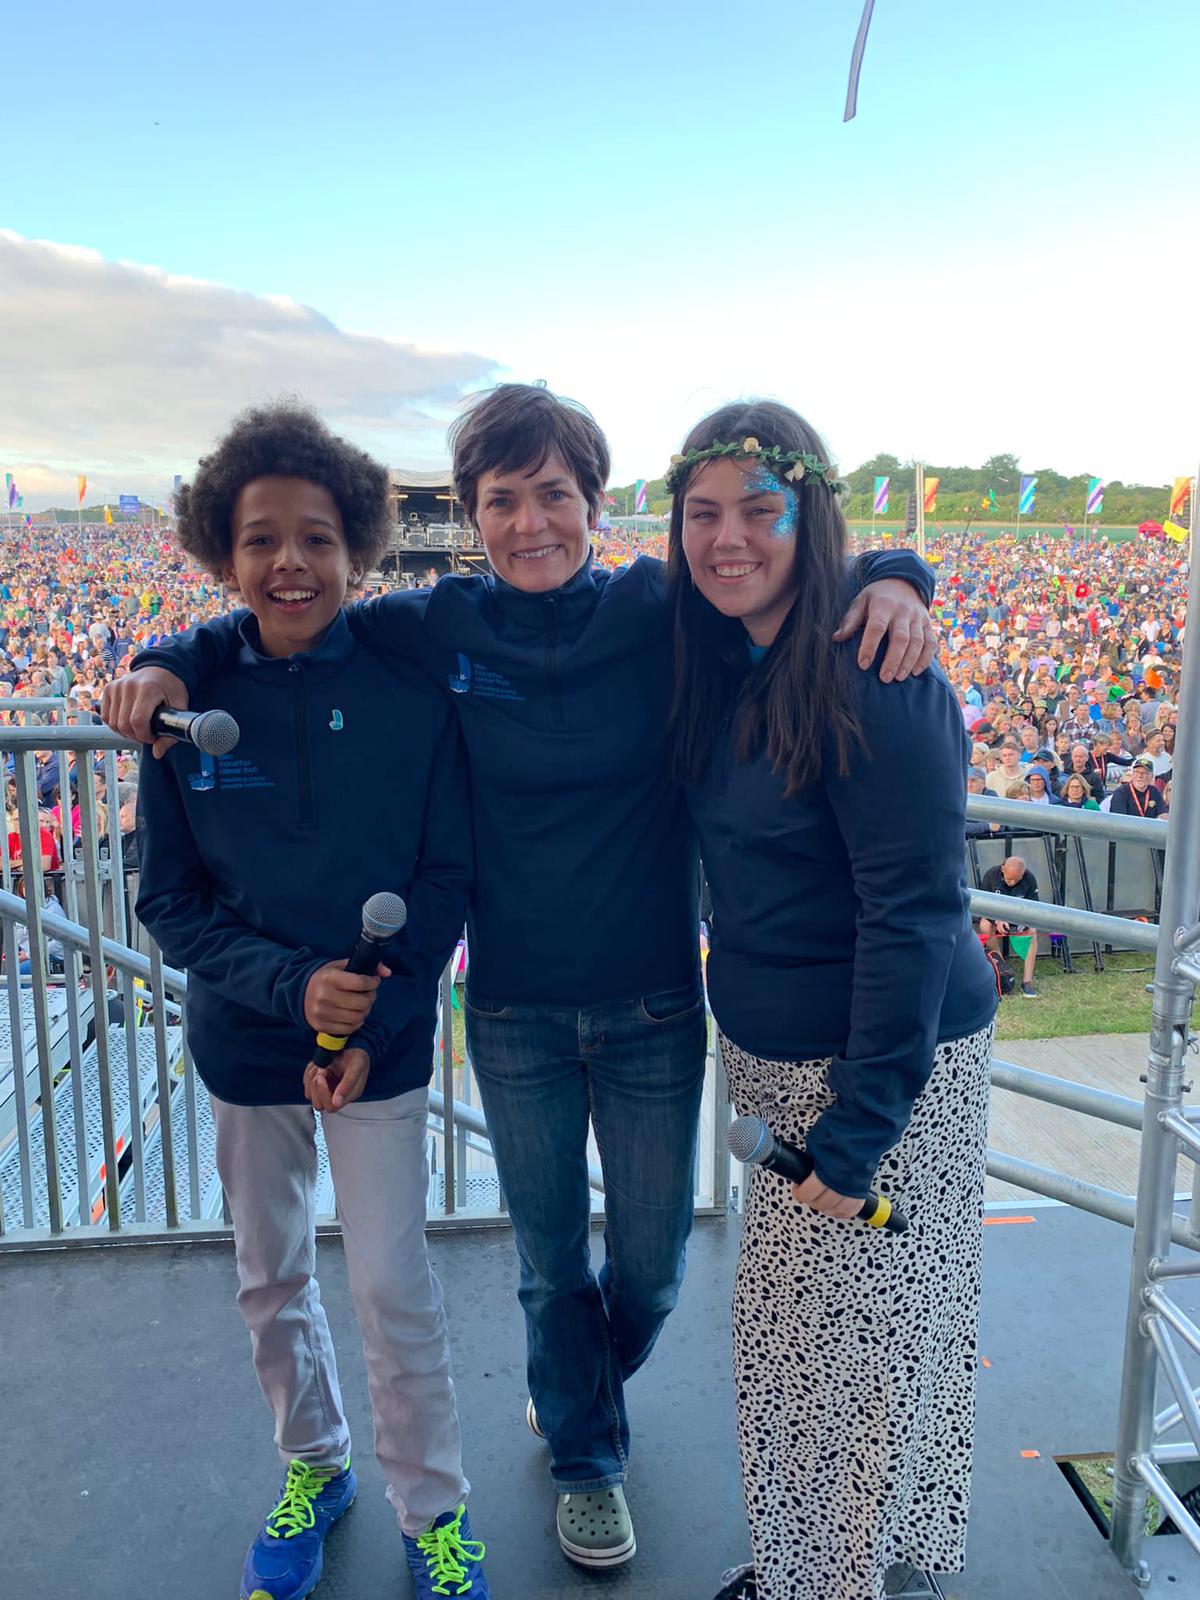 Dame Ellen MacArthur joins Trust ambassadors, Emmanuel and Macy, on stage at CarFest South in August 2021